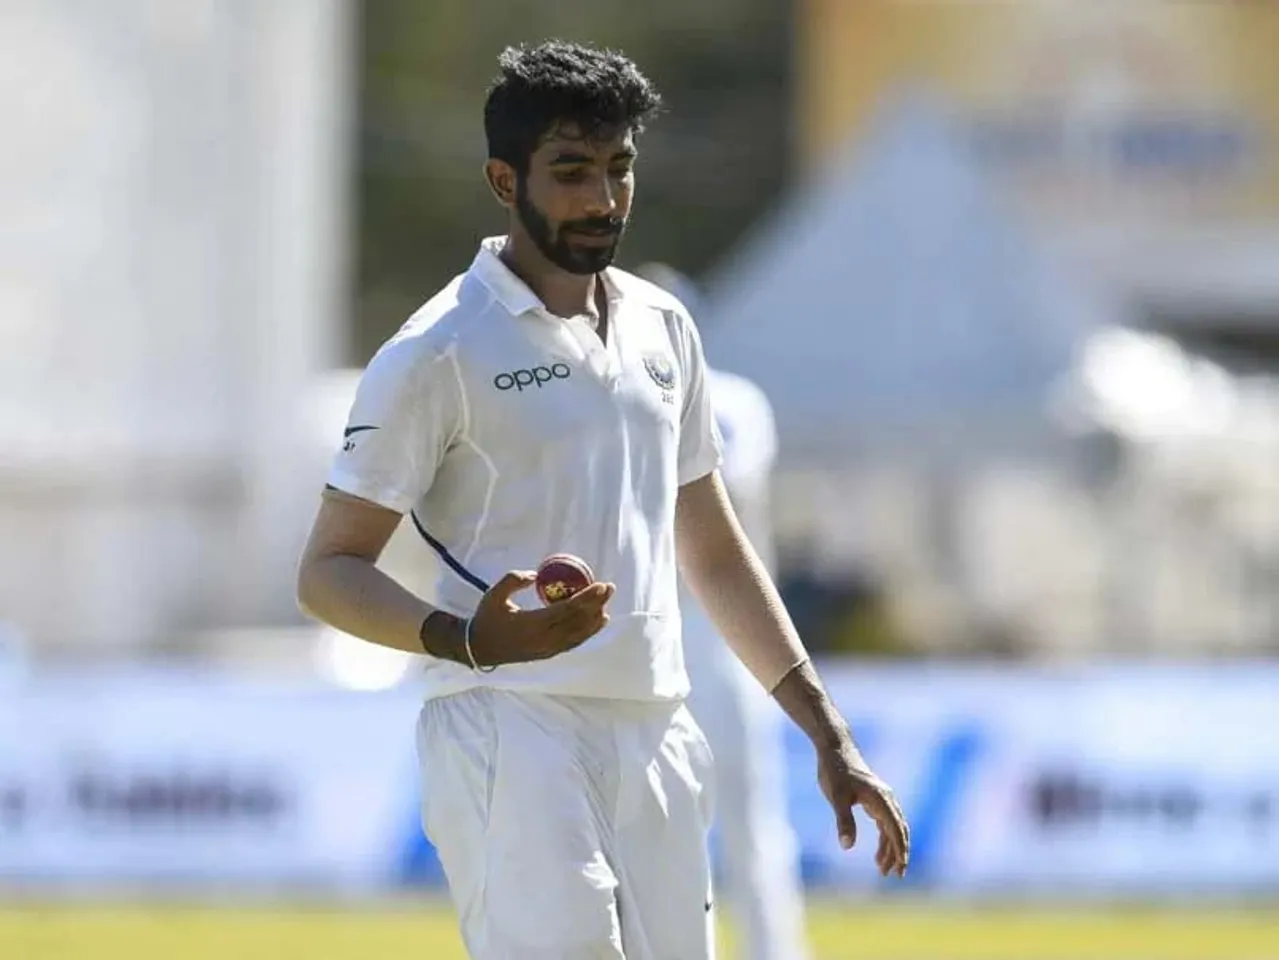 Jasprit Bumrah tops the ;ist of Most away wickets since 2018